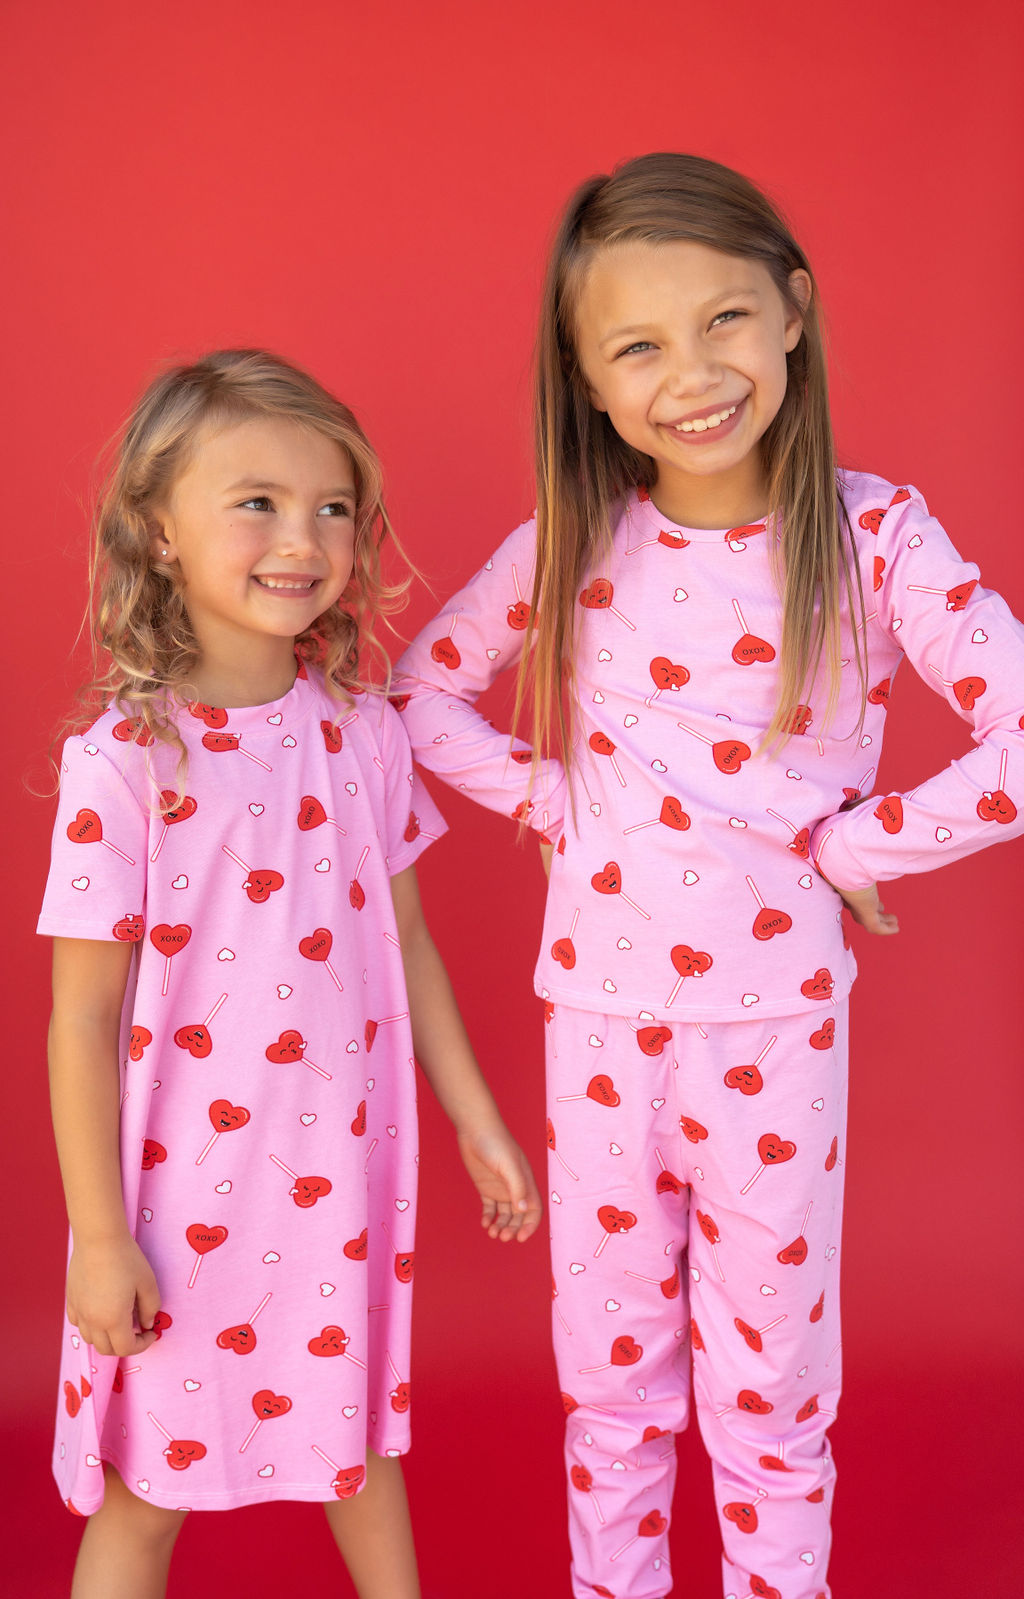 Girl in Heart Pop PJs and another girl in matching dress